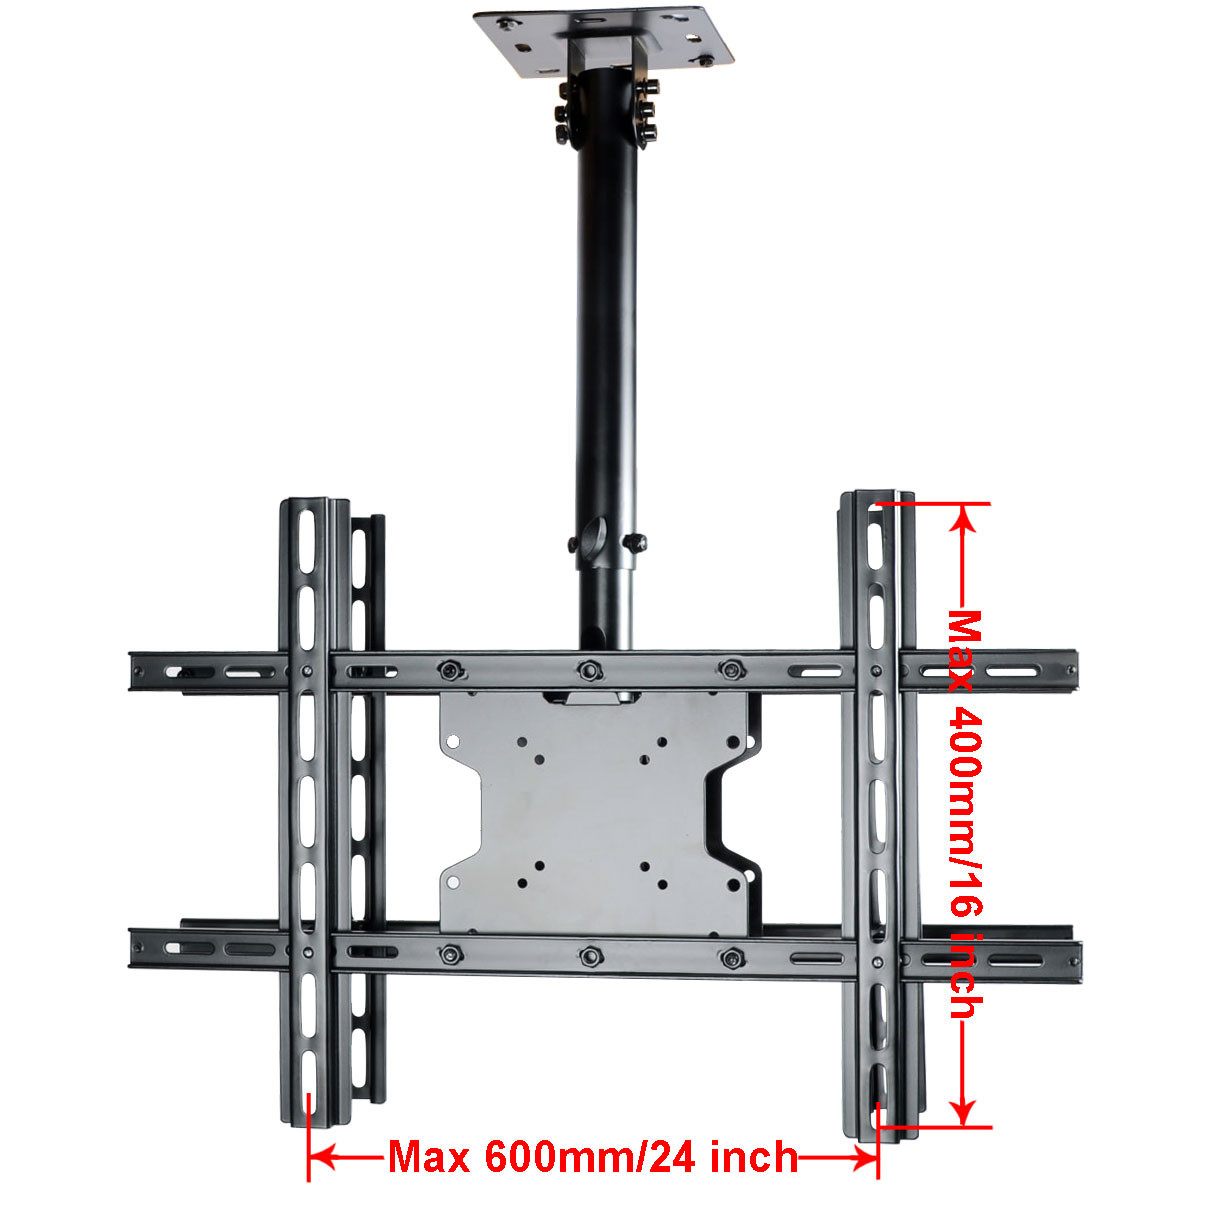 VideoSecu Adjustable Tilt Swivel Dual TV Ceiling Mount for 32"-70" LED LCD Plasma OLED HDTV Flat Panel Screen, 70" with mounting hole patterns 600x400/400x400/400x200/300x300/200x200/200x100mm BXB - image 4 of 6